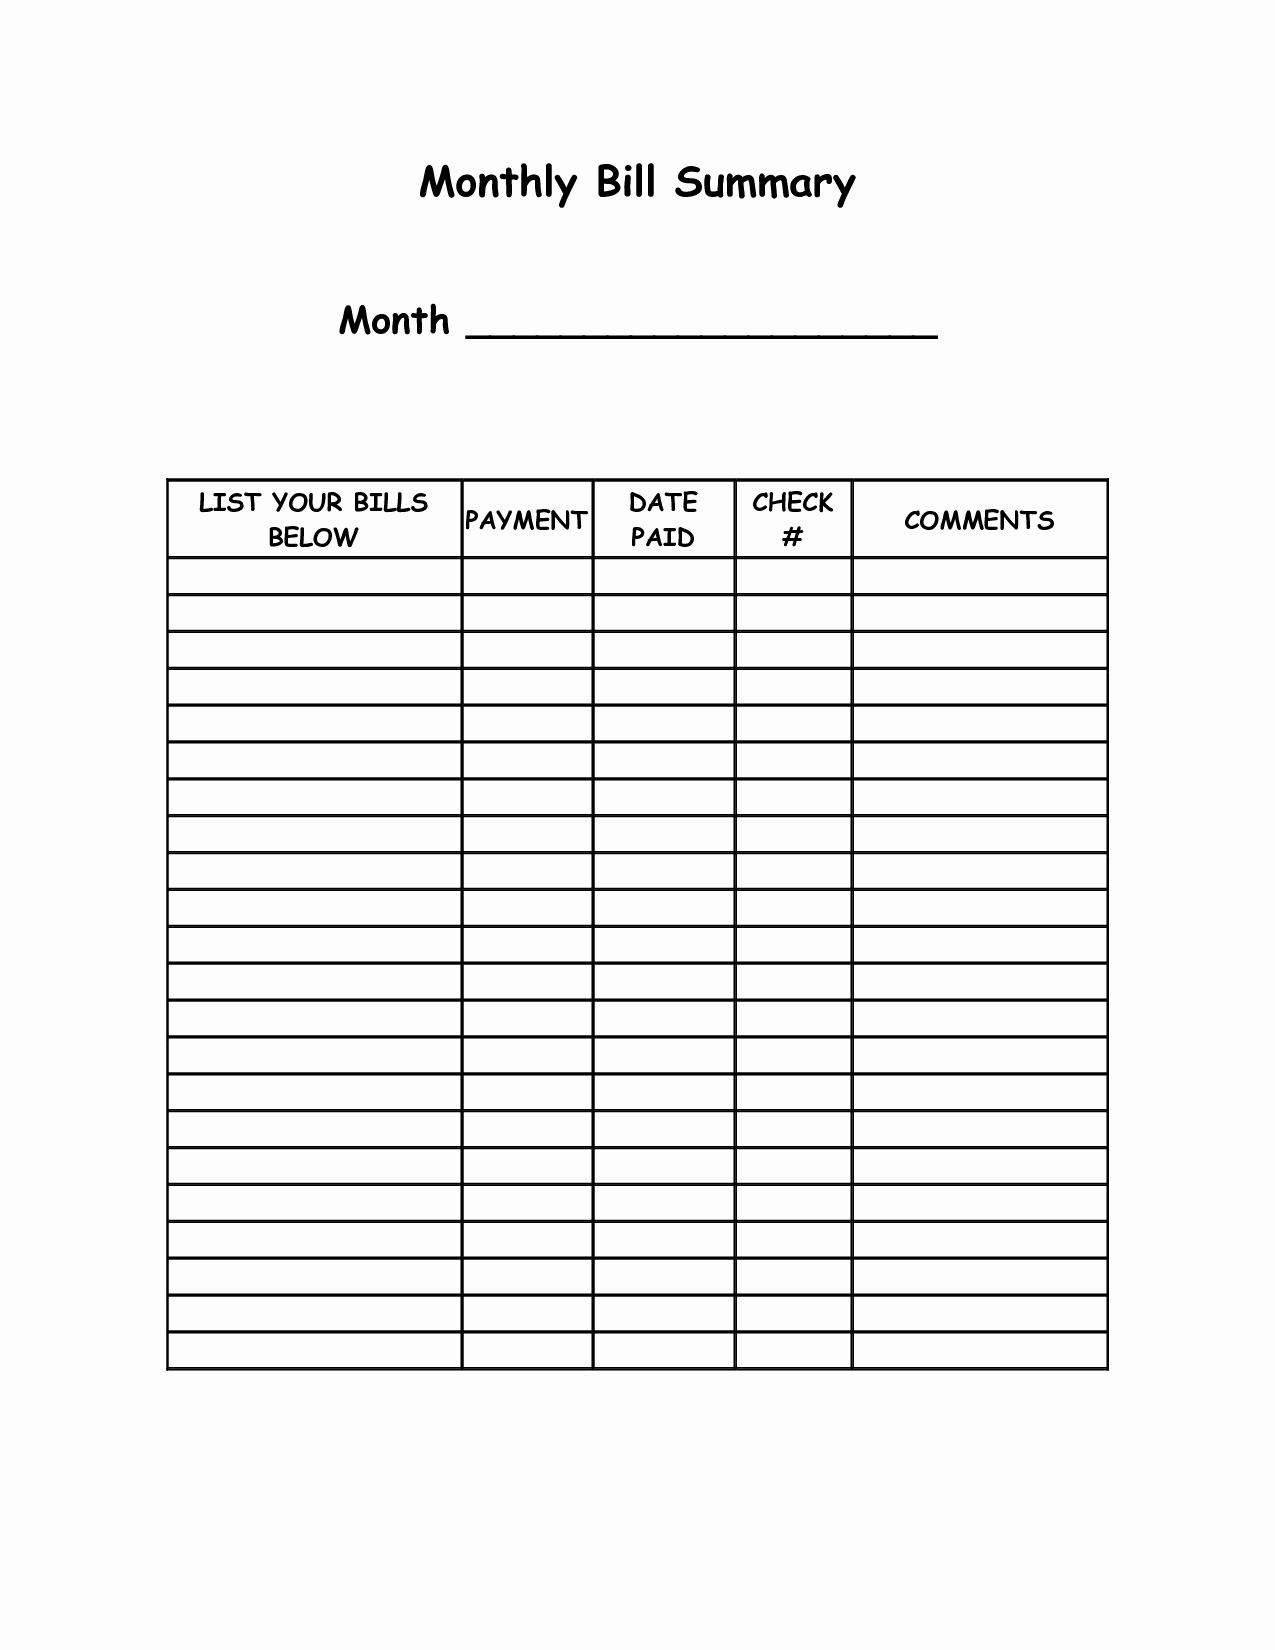 Bill Payment Schedule Template Best Of Monthly Bill Summary Doc organization